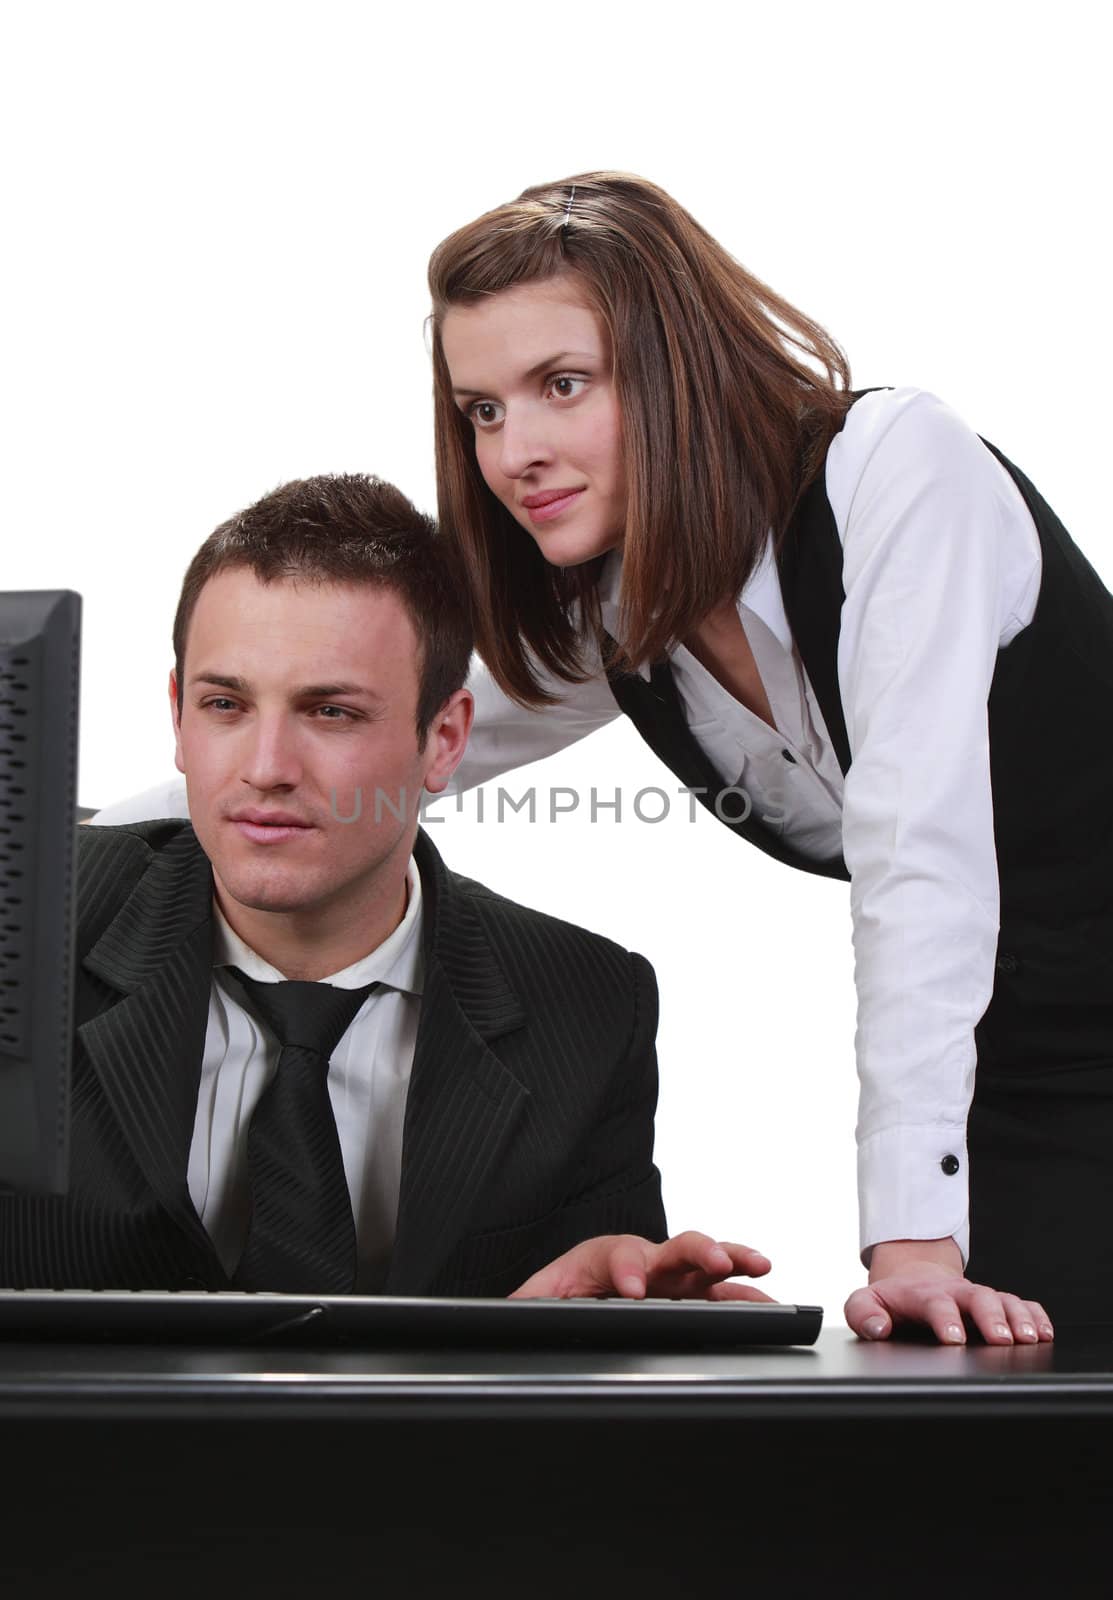 Young couple looking together to a computer, isolated against a white background.